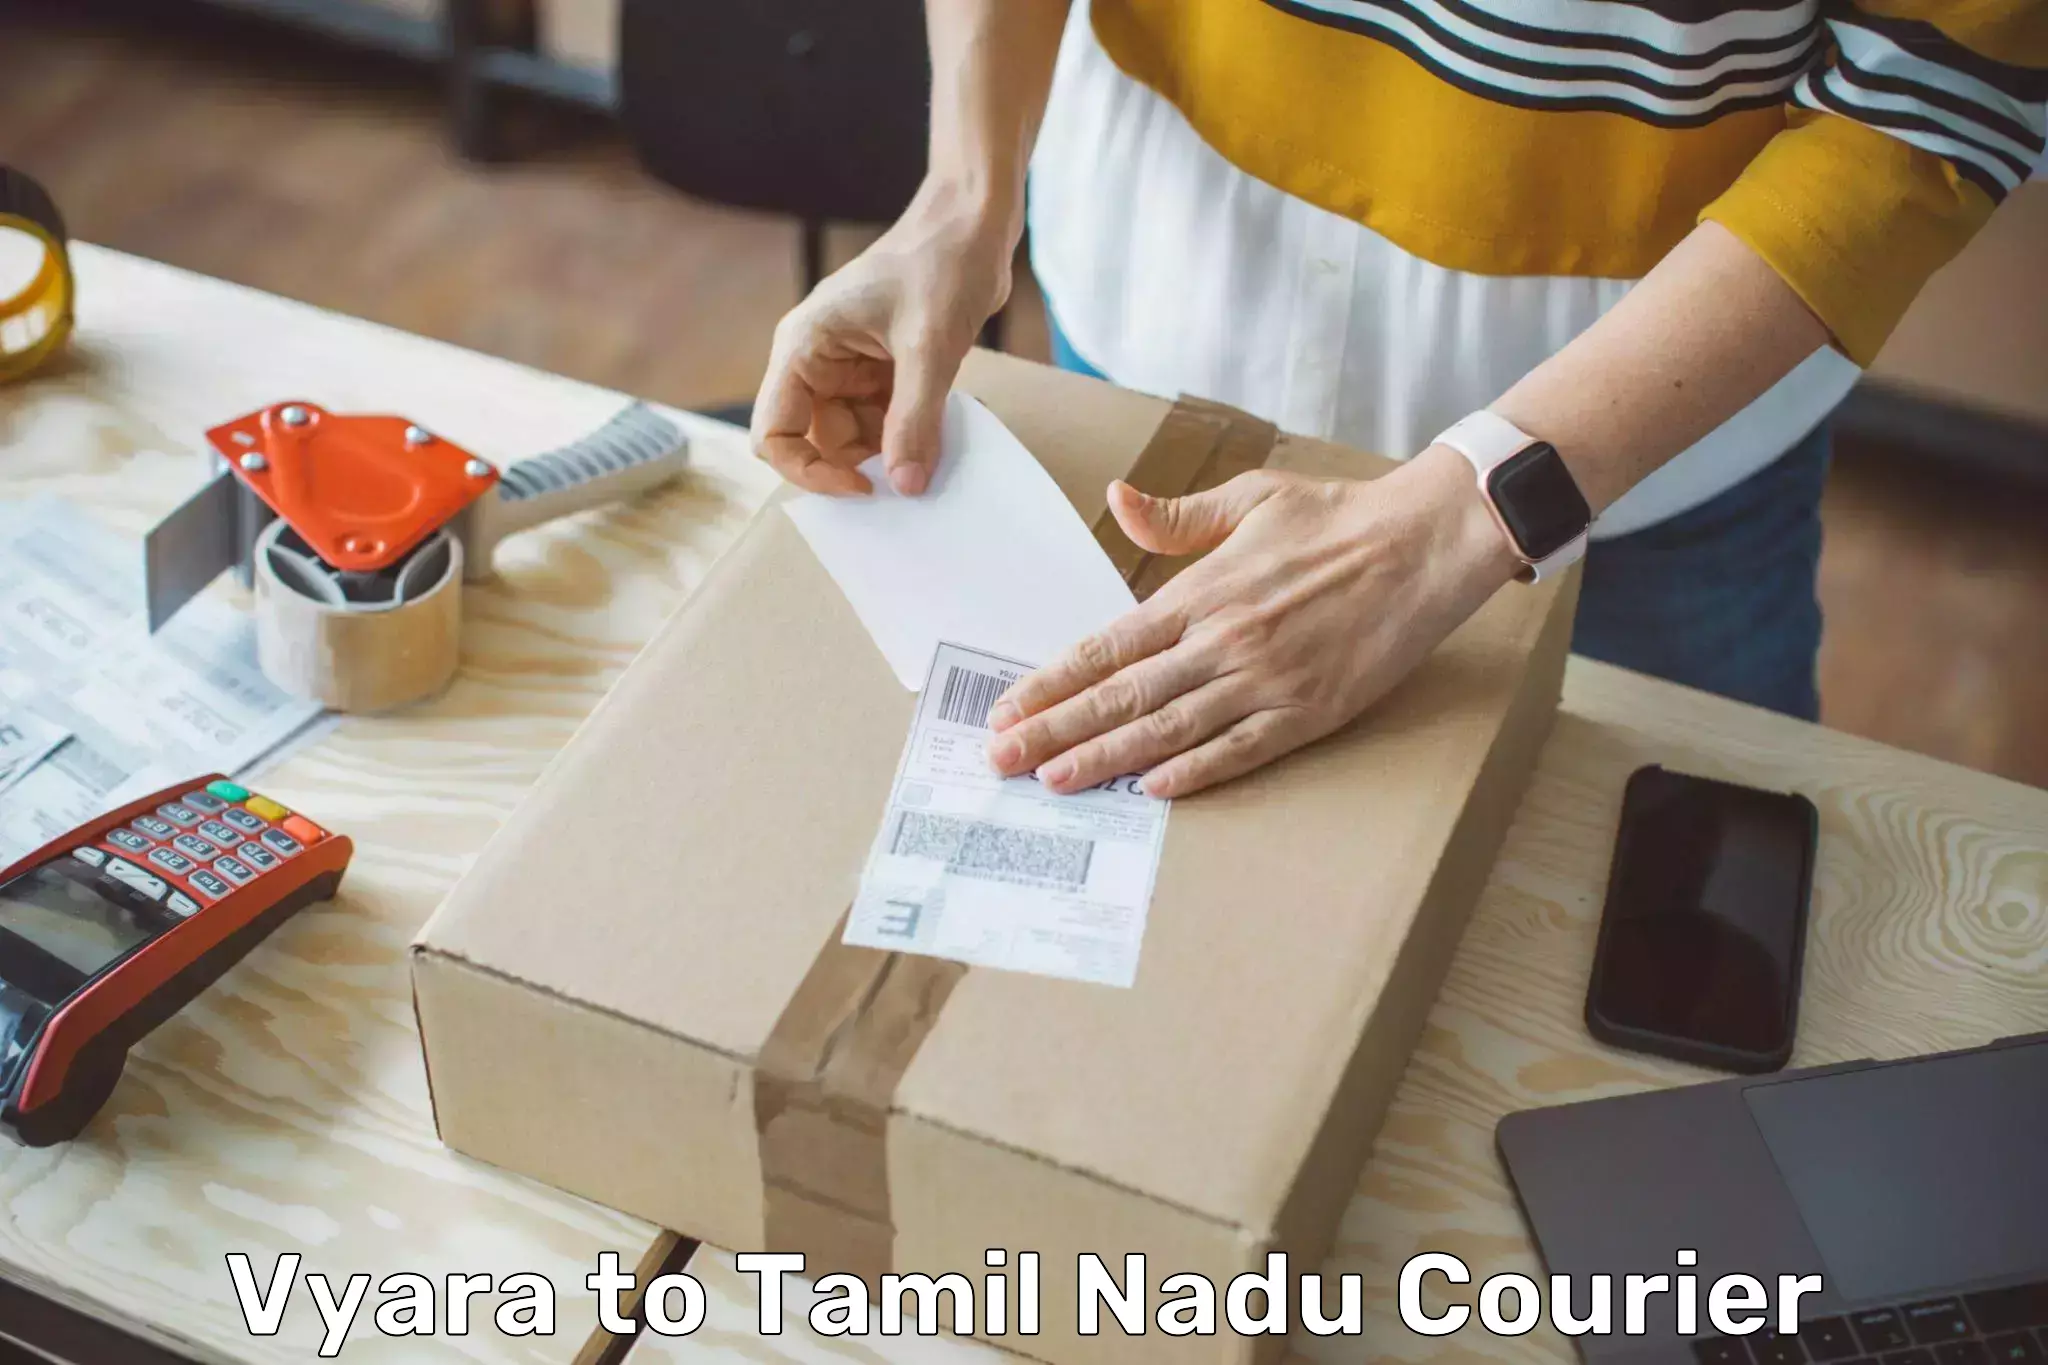 User-friendly delivery service Vyara to Velur